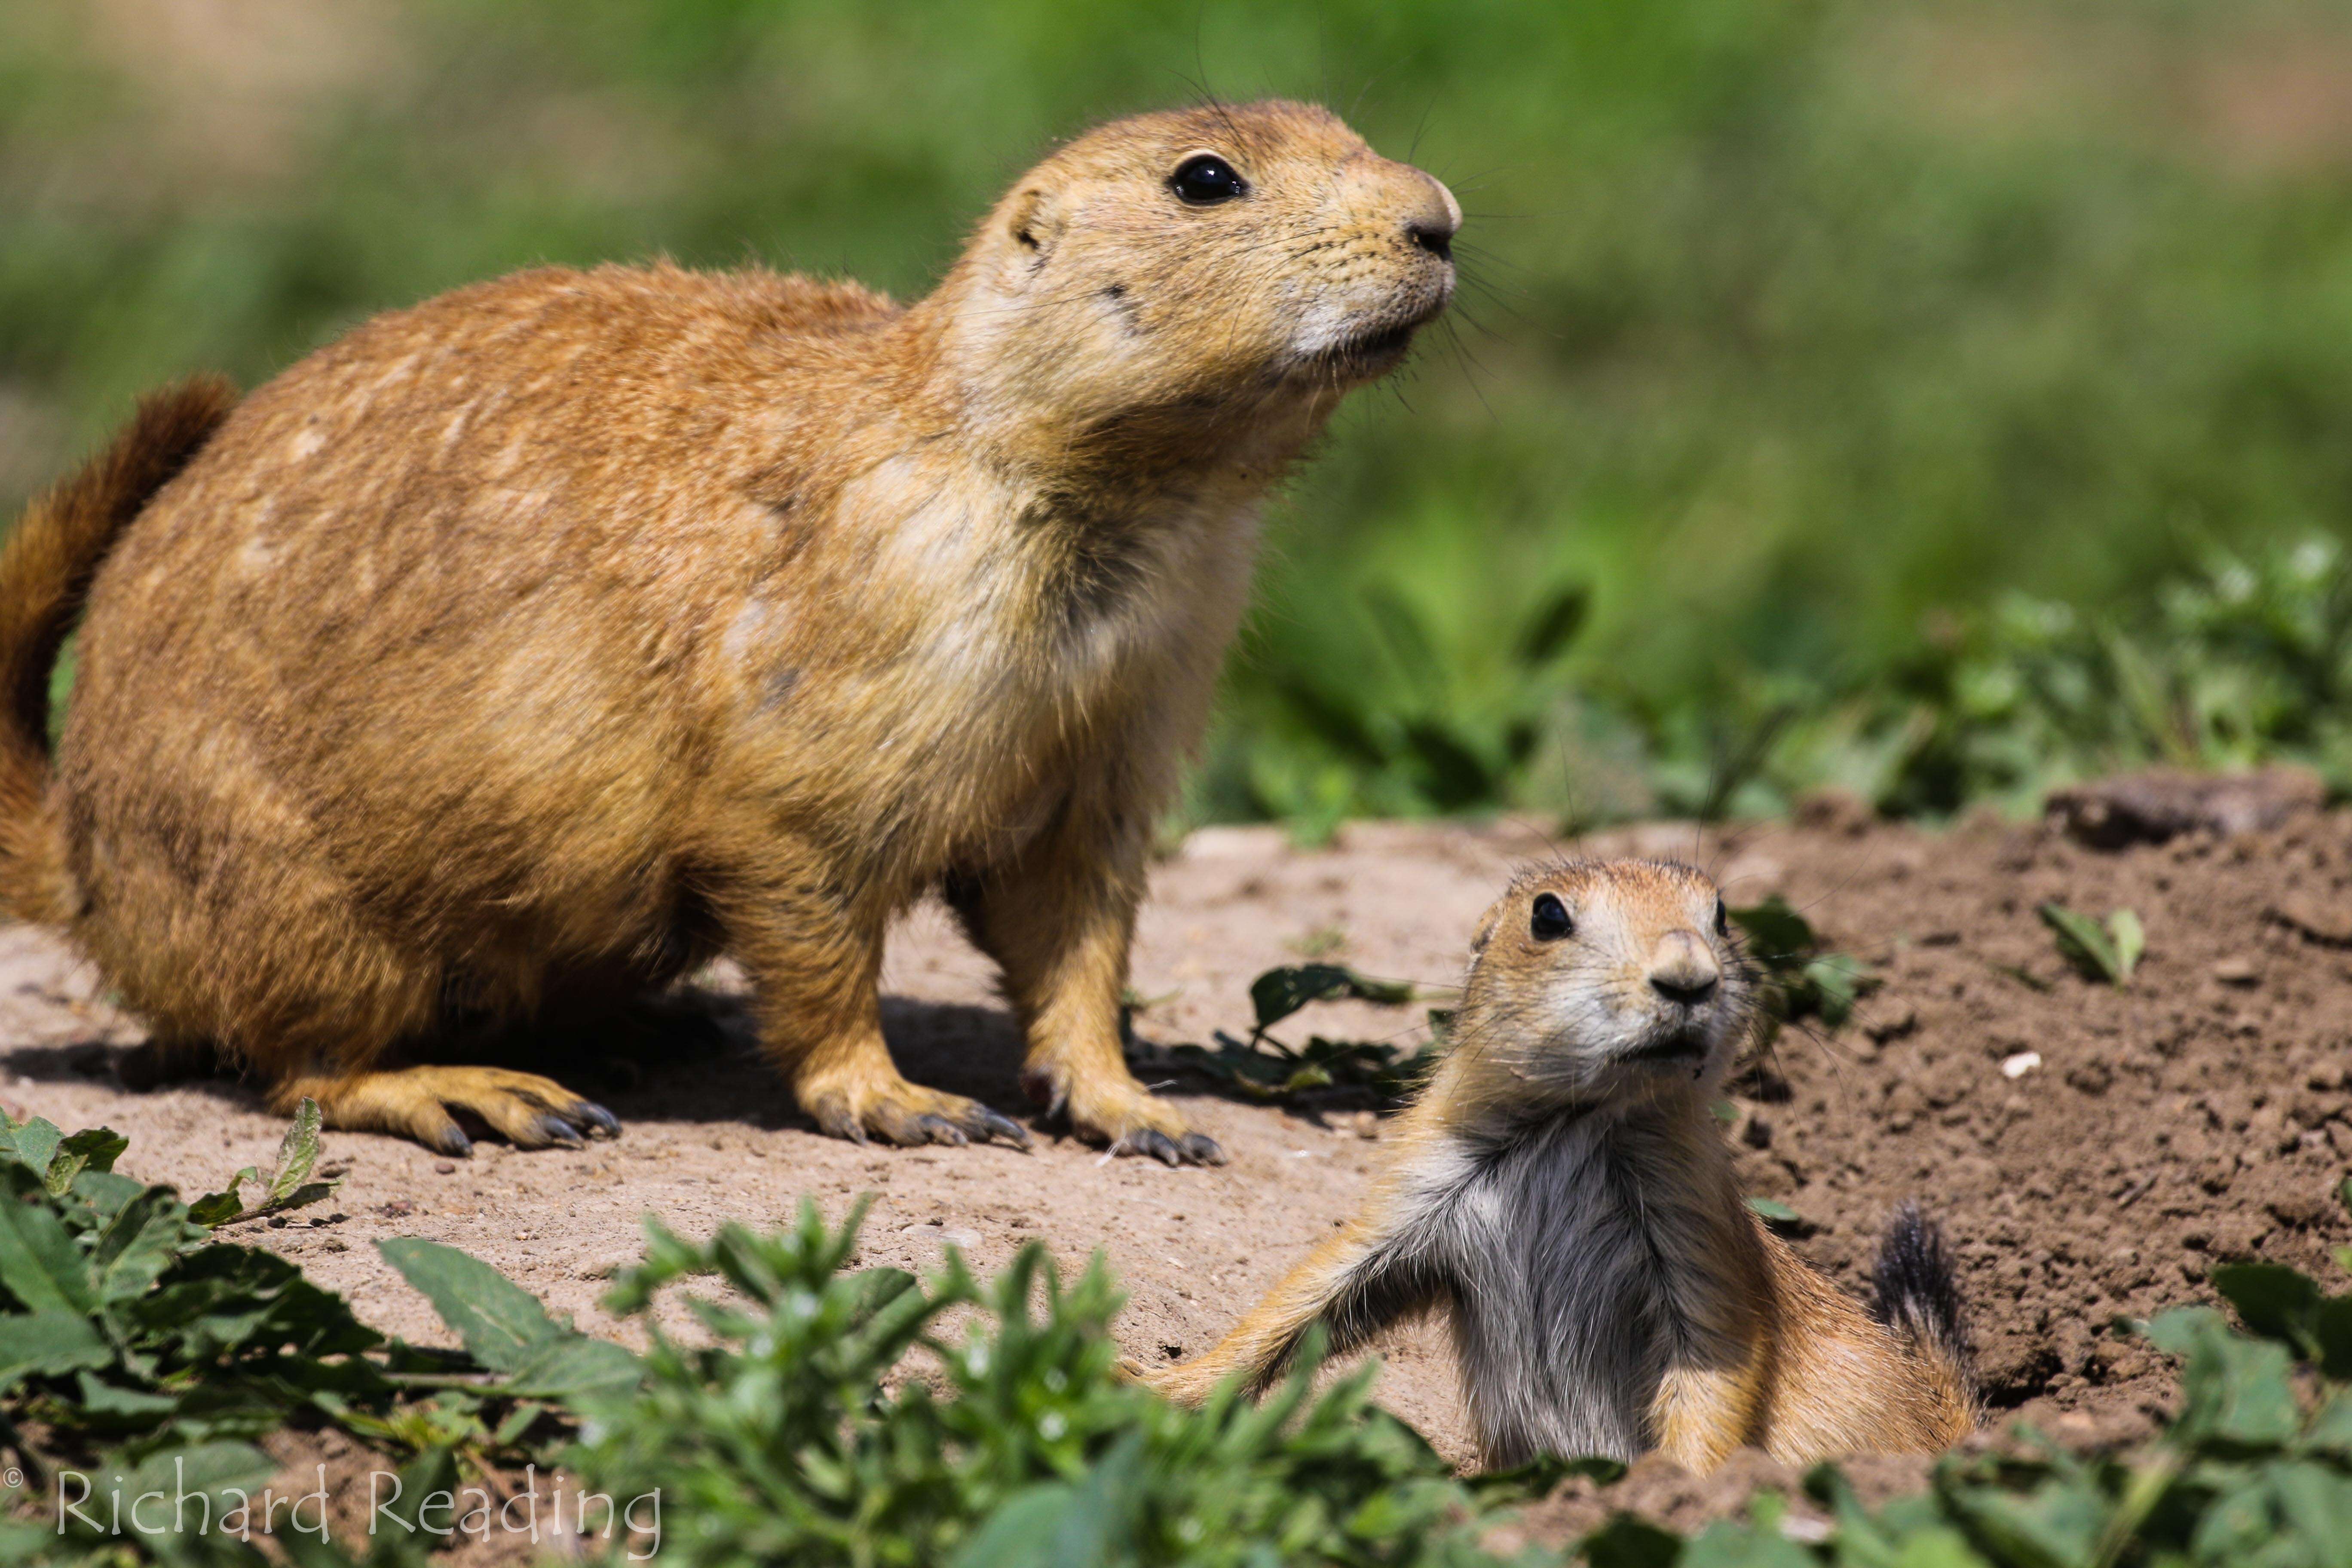 Adult prairie dog and baby